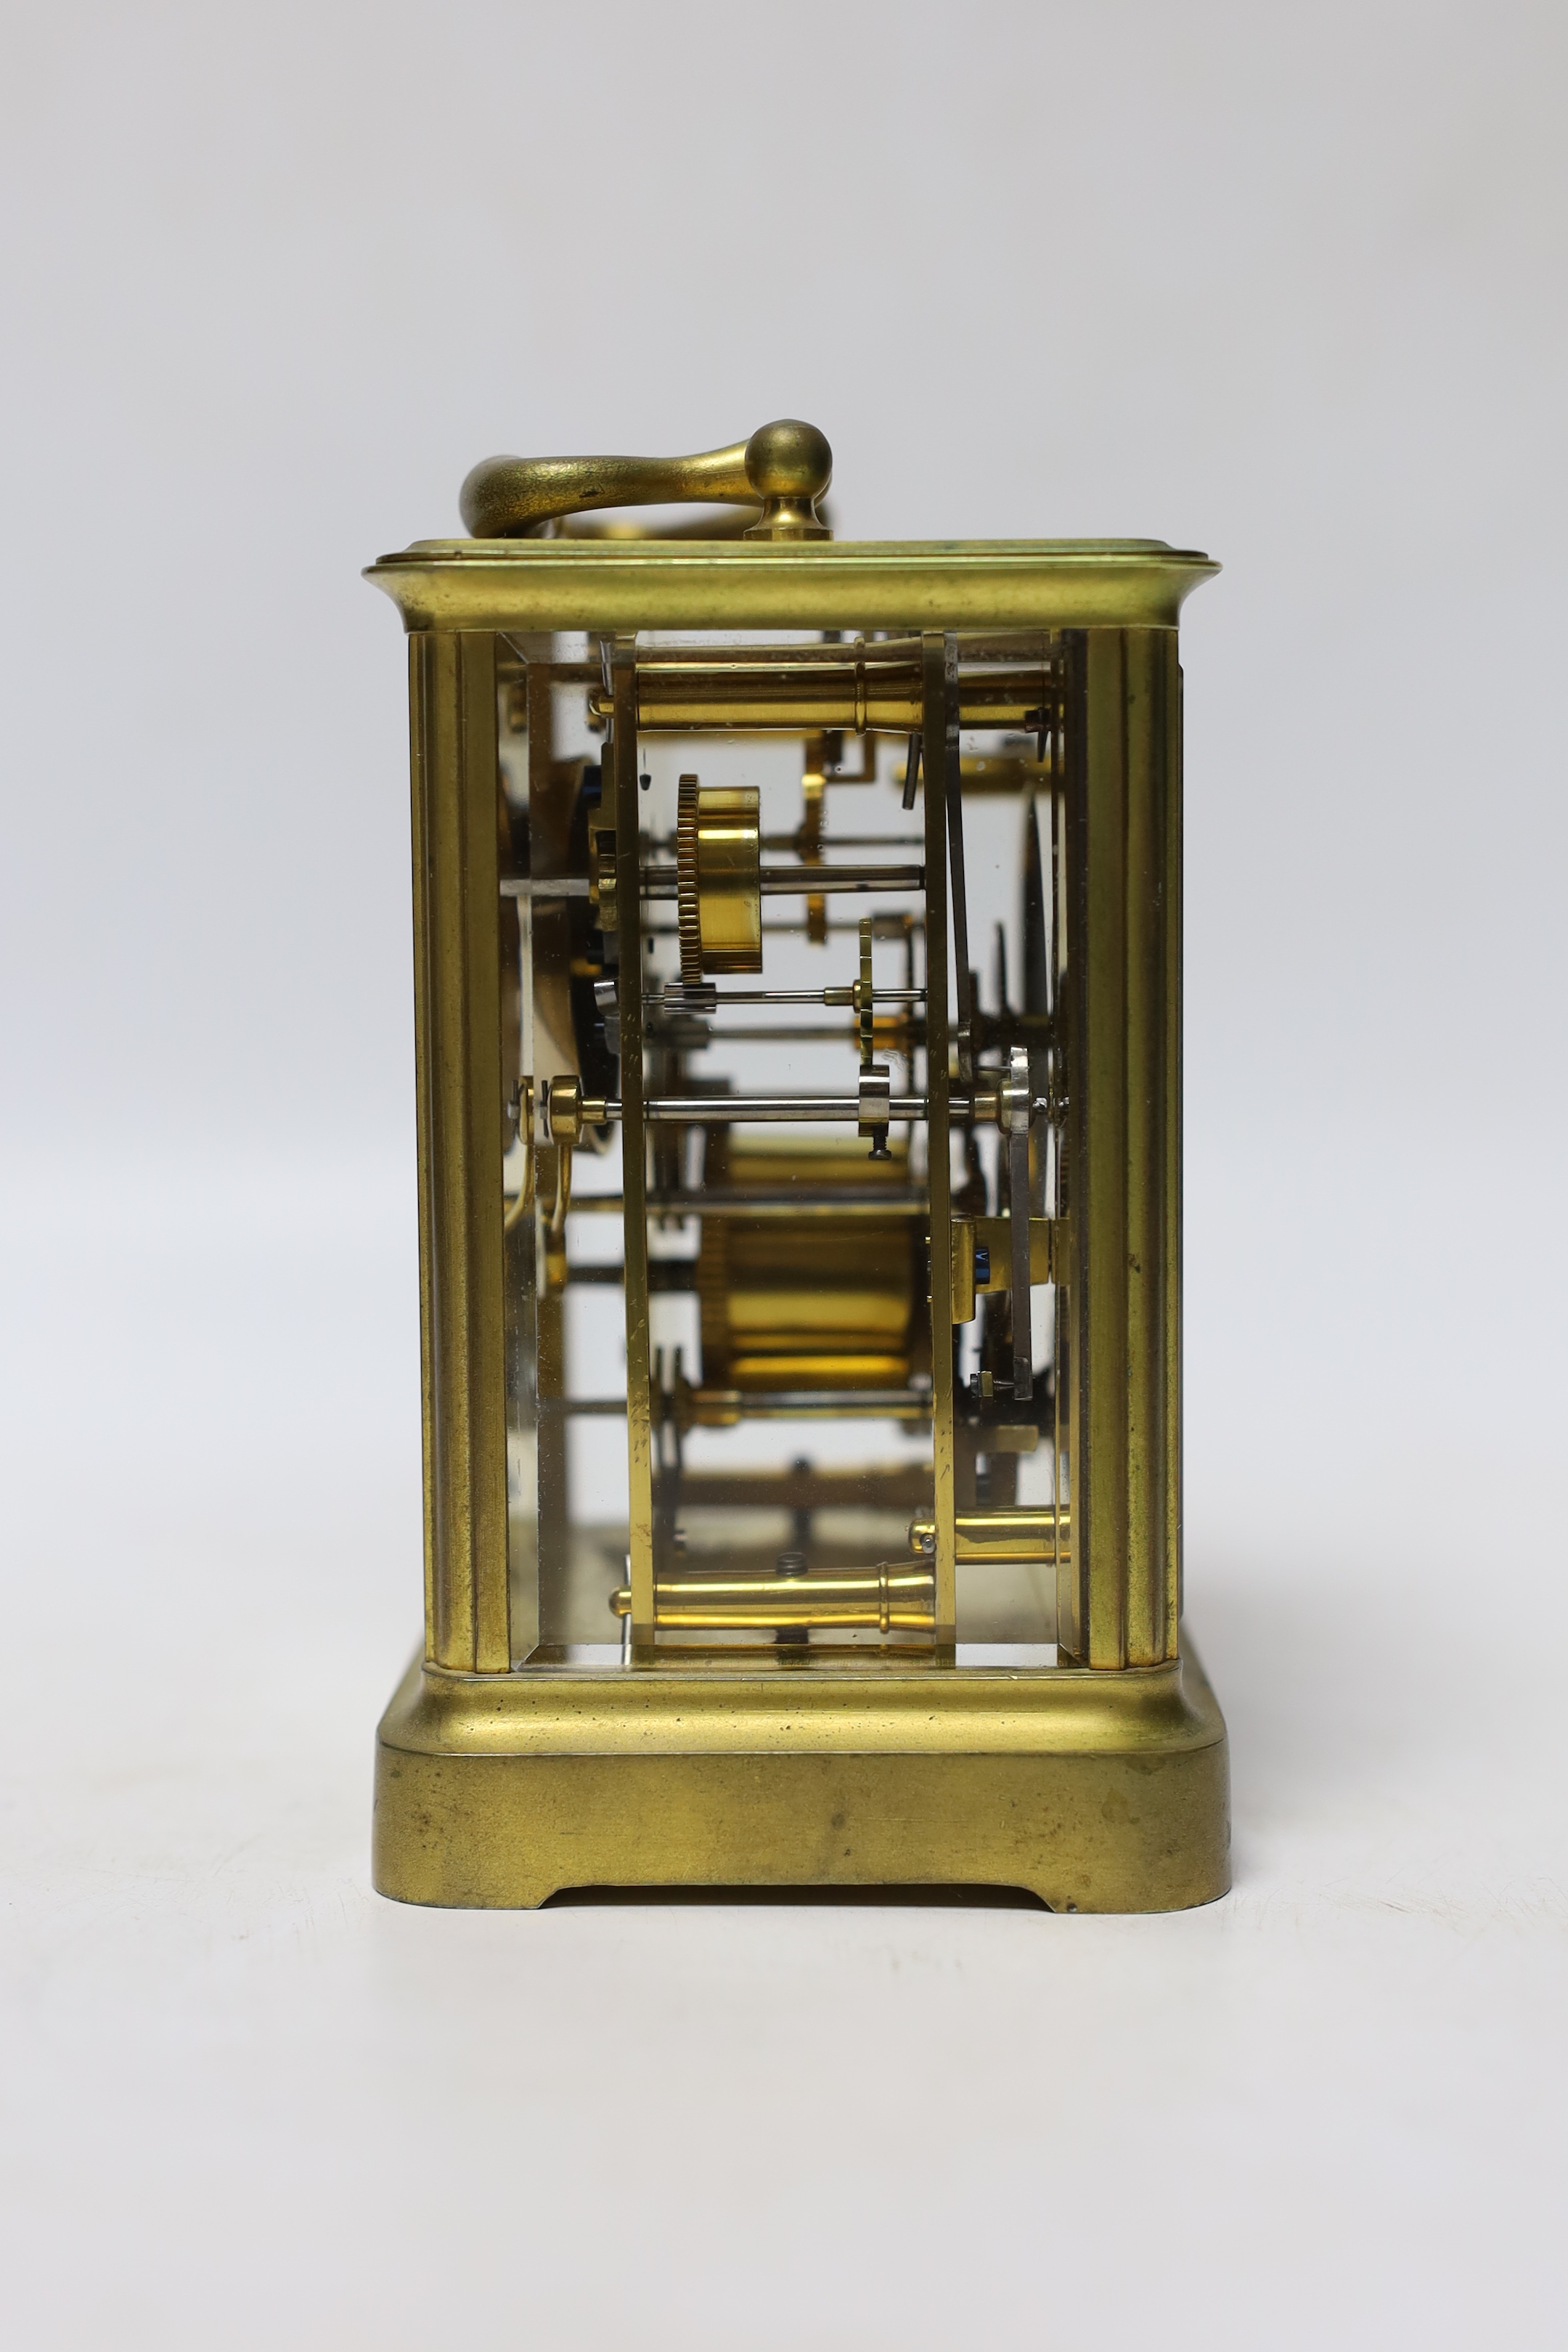 A French brass carriage clock striking on a bell, 12cm